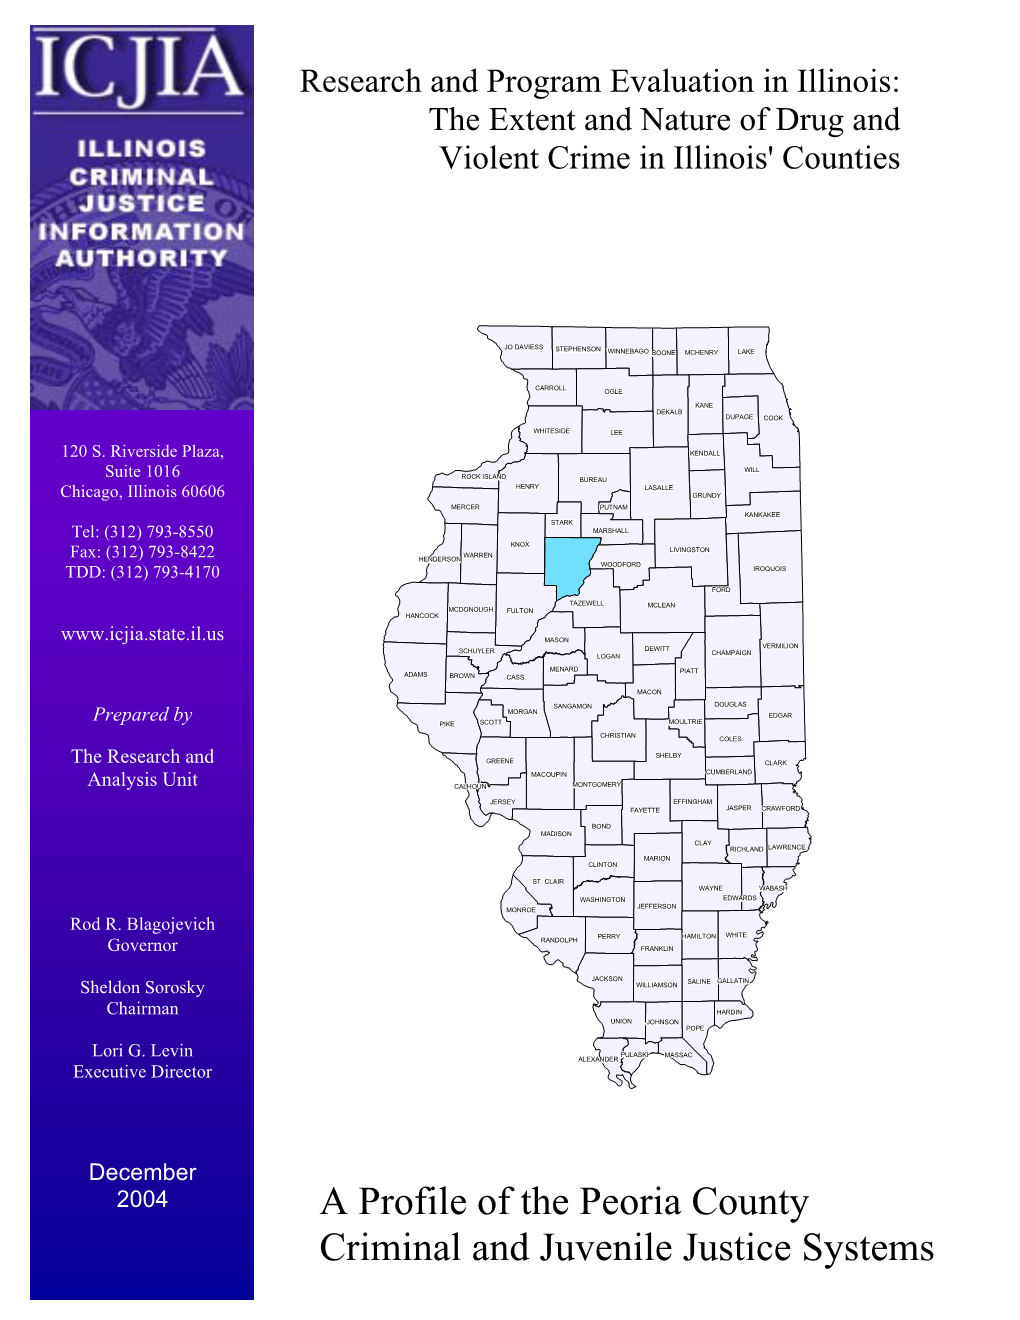 A Profile of the Peoria County Criminal and Juvenile Justice Systems